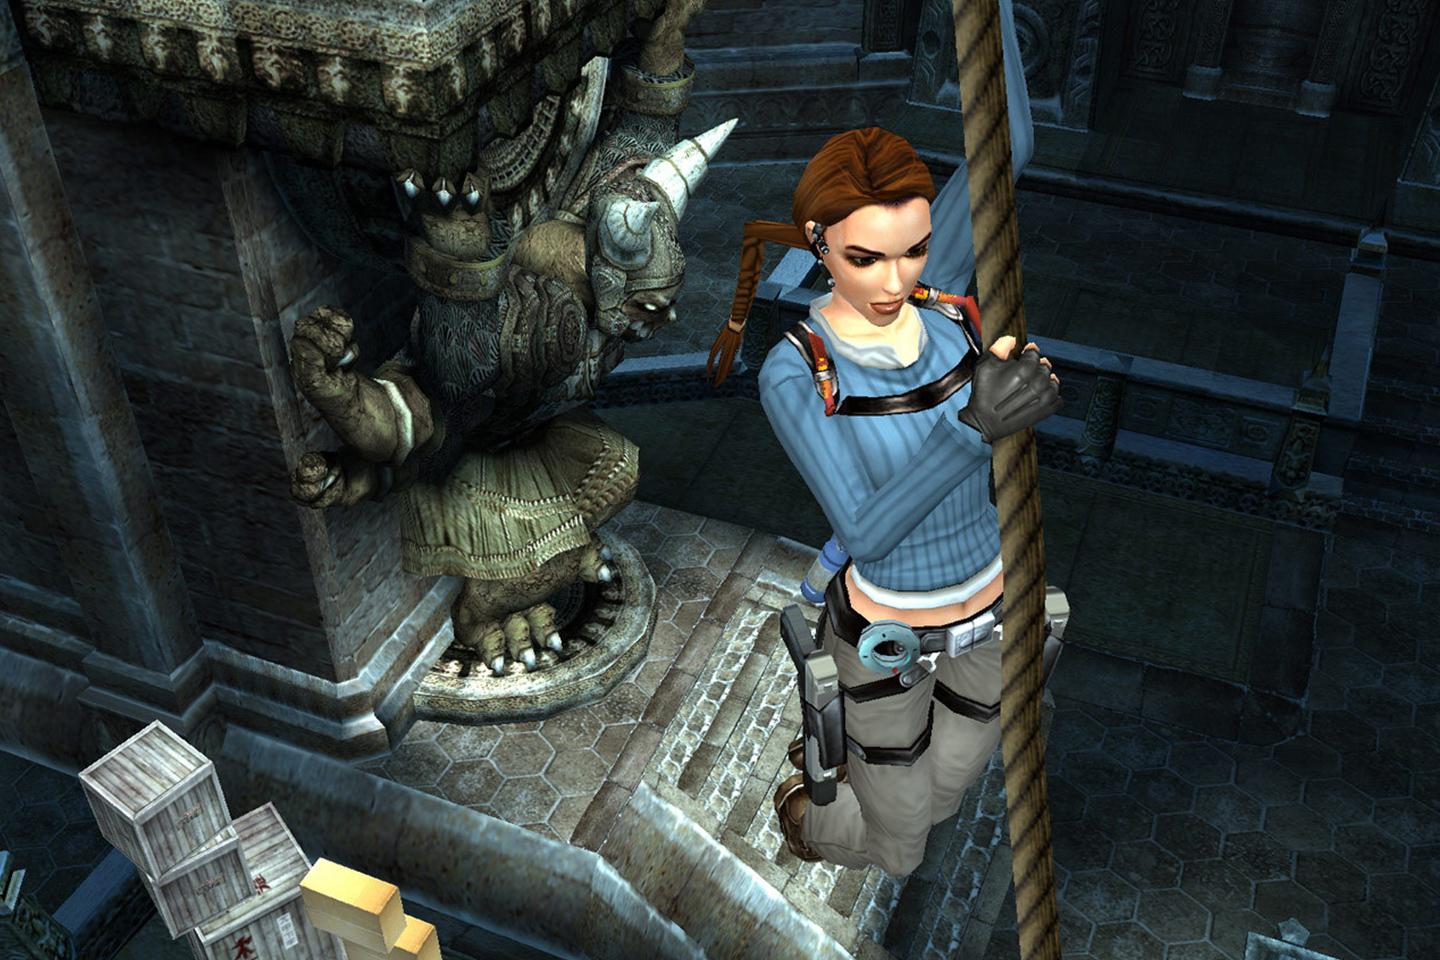 Lara holding onto rope dangling above tomb stairs.